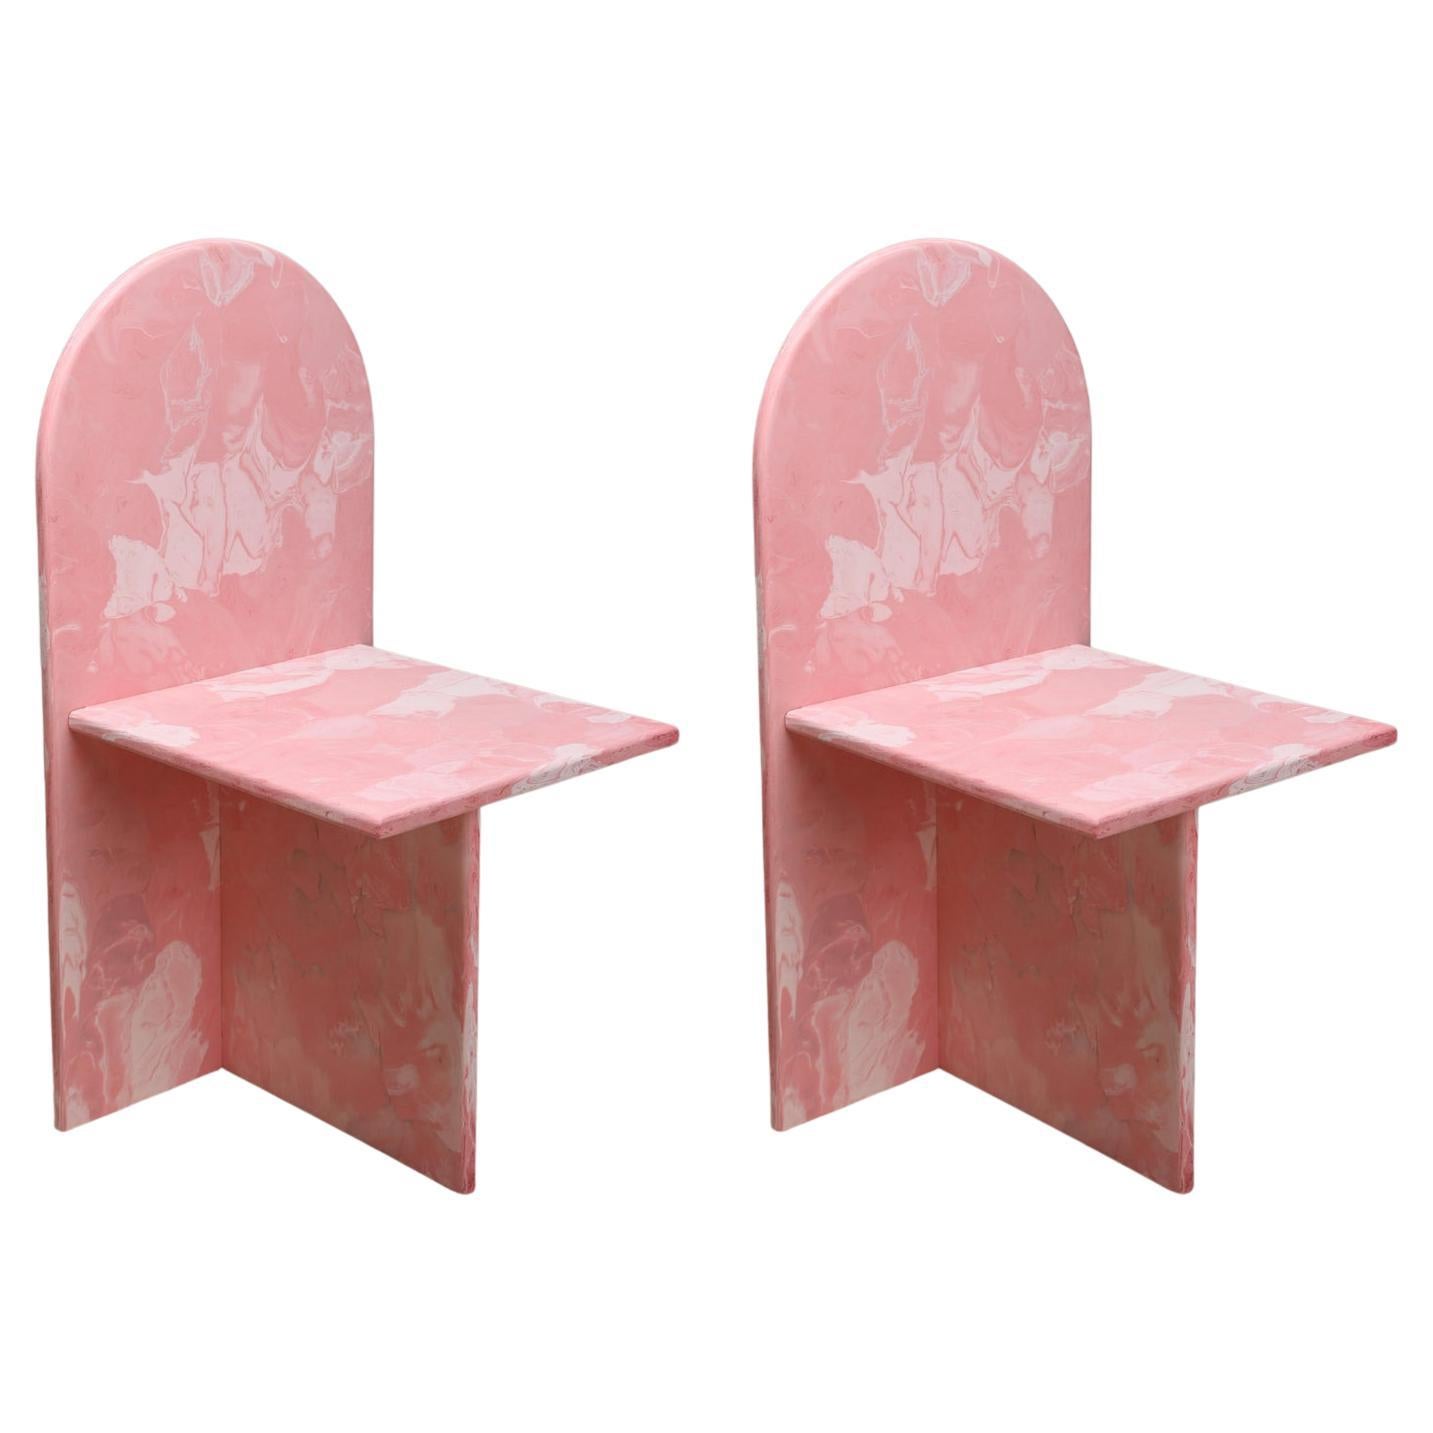 2x Contemporary Chairs Pink 100% Recycled Plastic Hand-Crafted by Anqa Studios For Sale